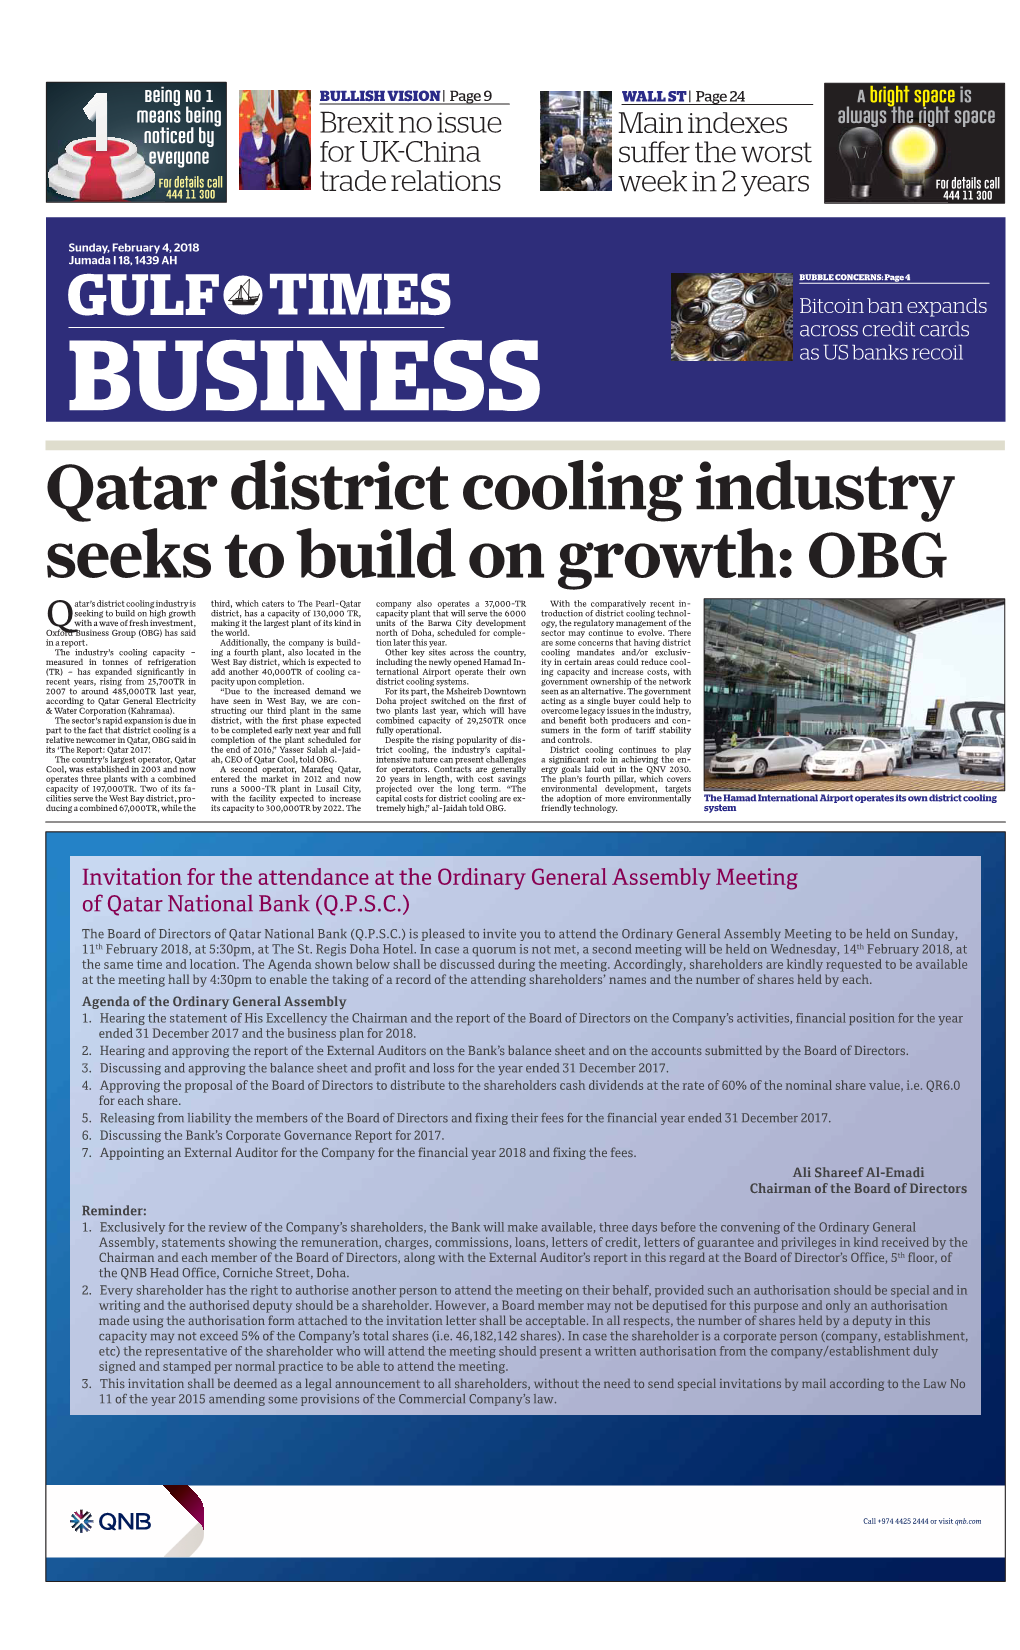 Qatar District Cooling Industry Seeks to Build on Growth